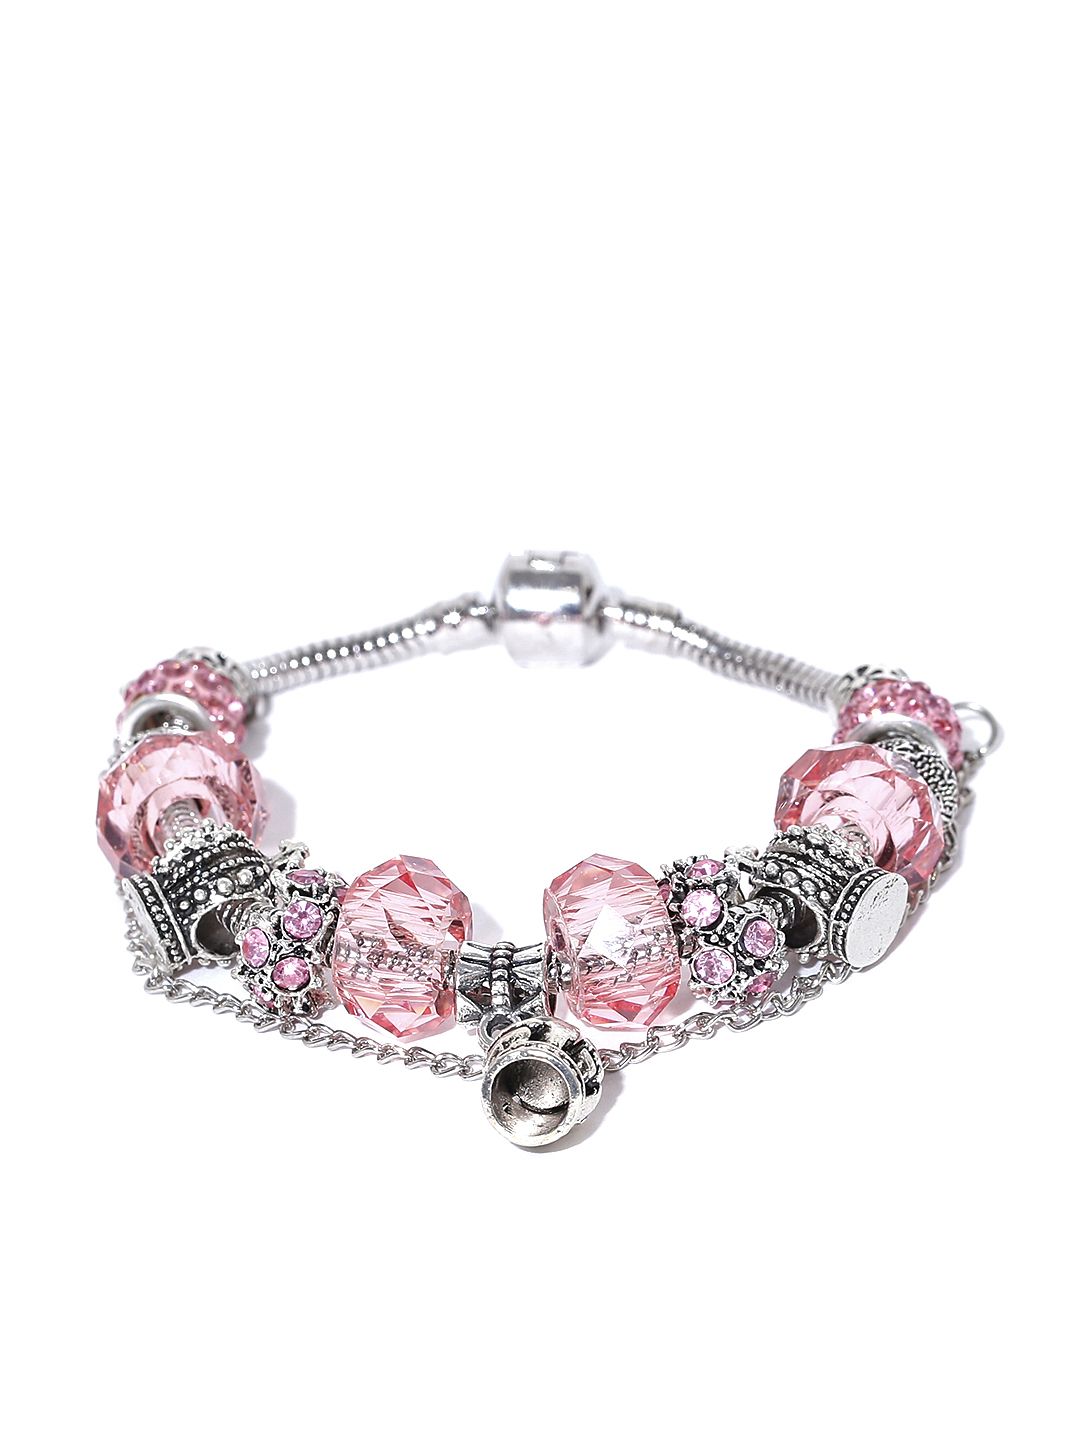 Jewels Galaxy Oxidised Silver-Plated Beaded & Stone-Studded Handcrafted Charm Bracelet Price in India